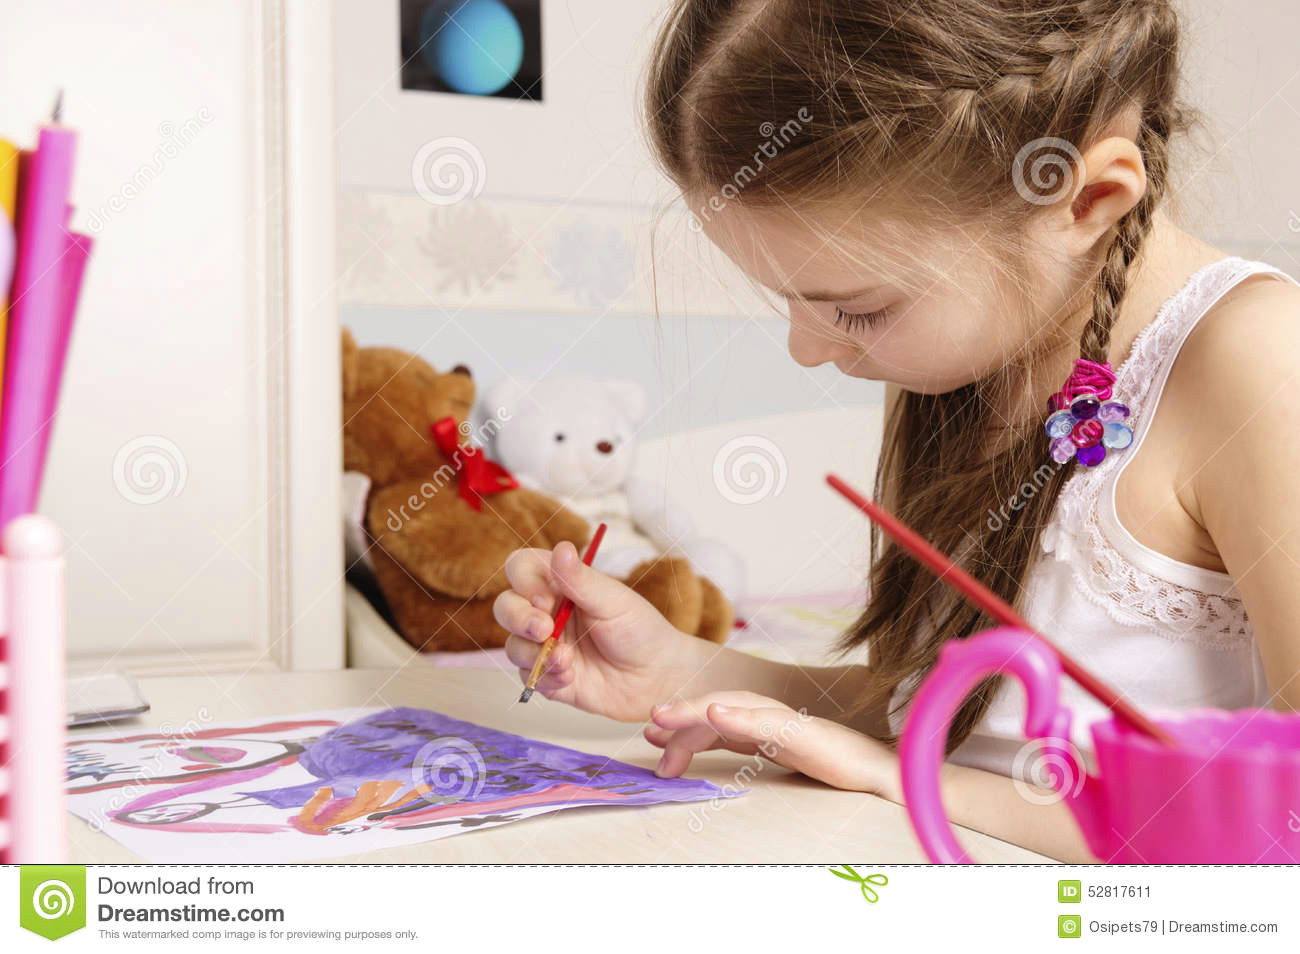 Drawing Of A Girl Sitting at A Desk Portrait Of A Young Girl Drawing A Picture In Her Playroom Stock